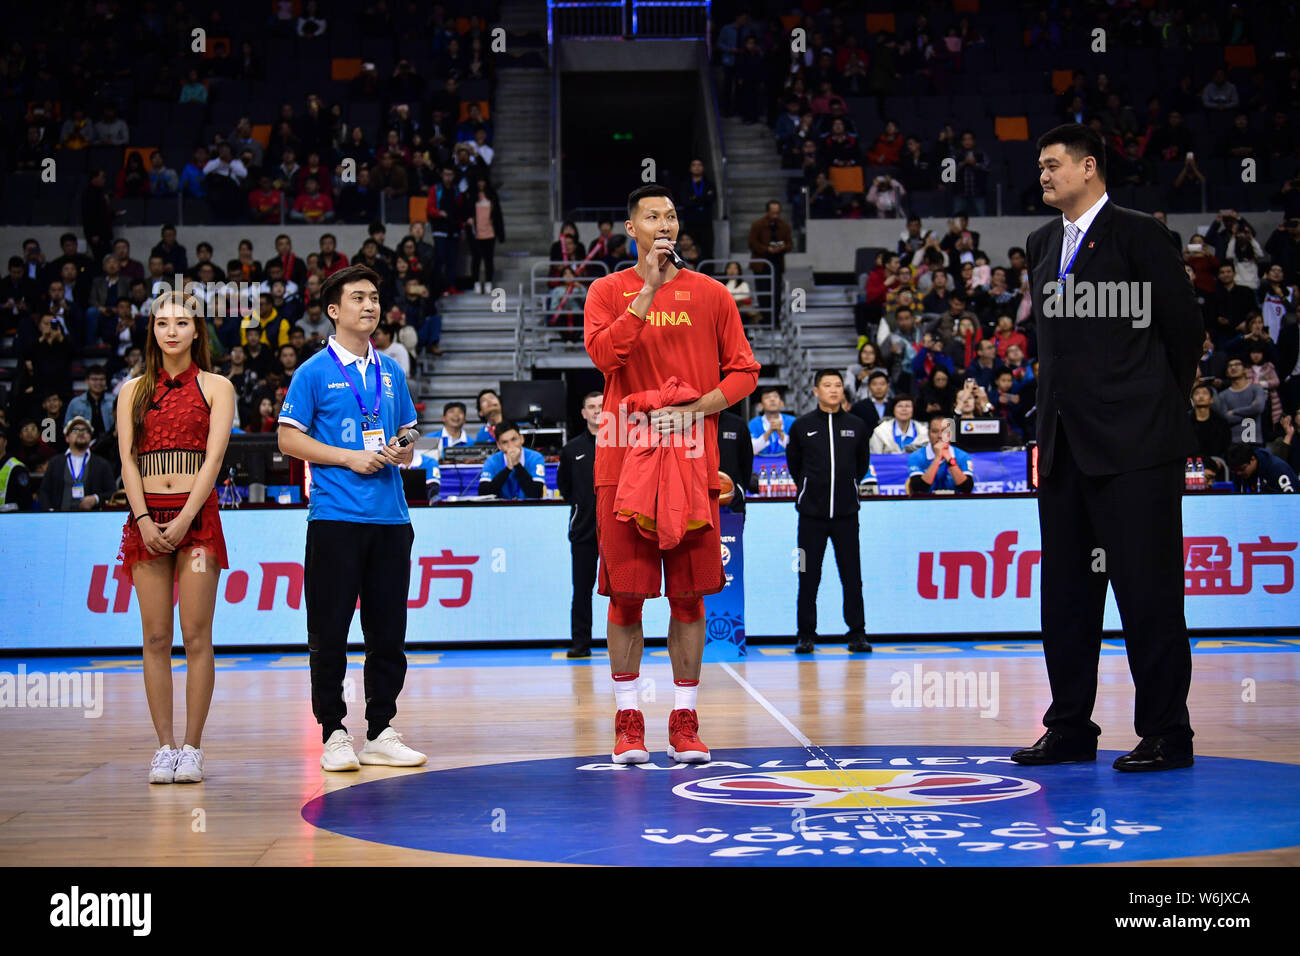 Chinese basketball player Yi Jianlian speaks as he receives a Chinese National team's jacket from retired Chinese basketball star Yao Ming, chairman o Stock Photo